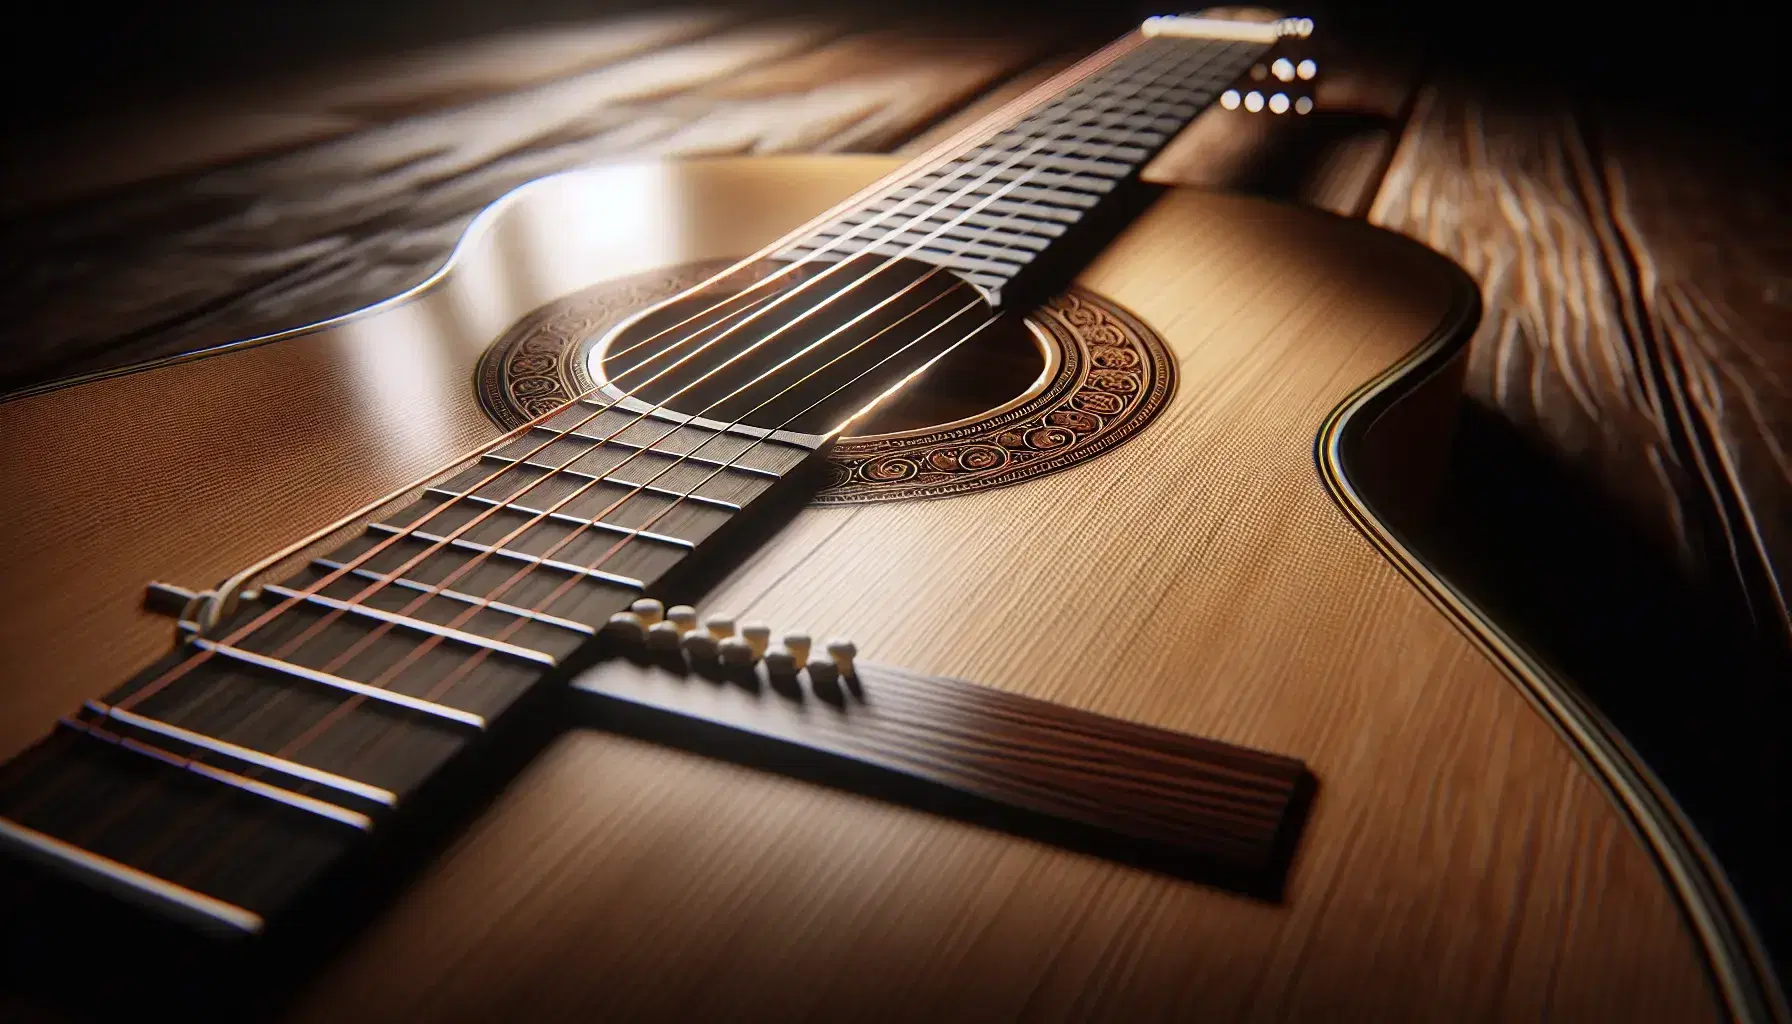 Close-up of a classical guitar on a wooden table, highlighting the sound hole, strings, and intricate rosette design with a warm, amber-toned finish.